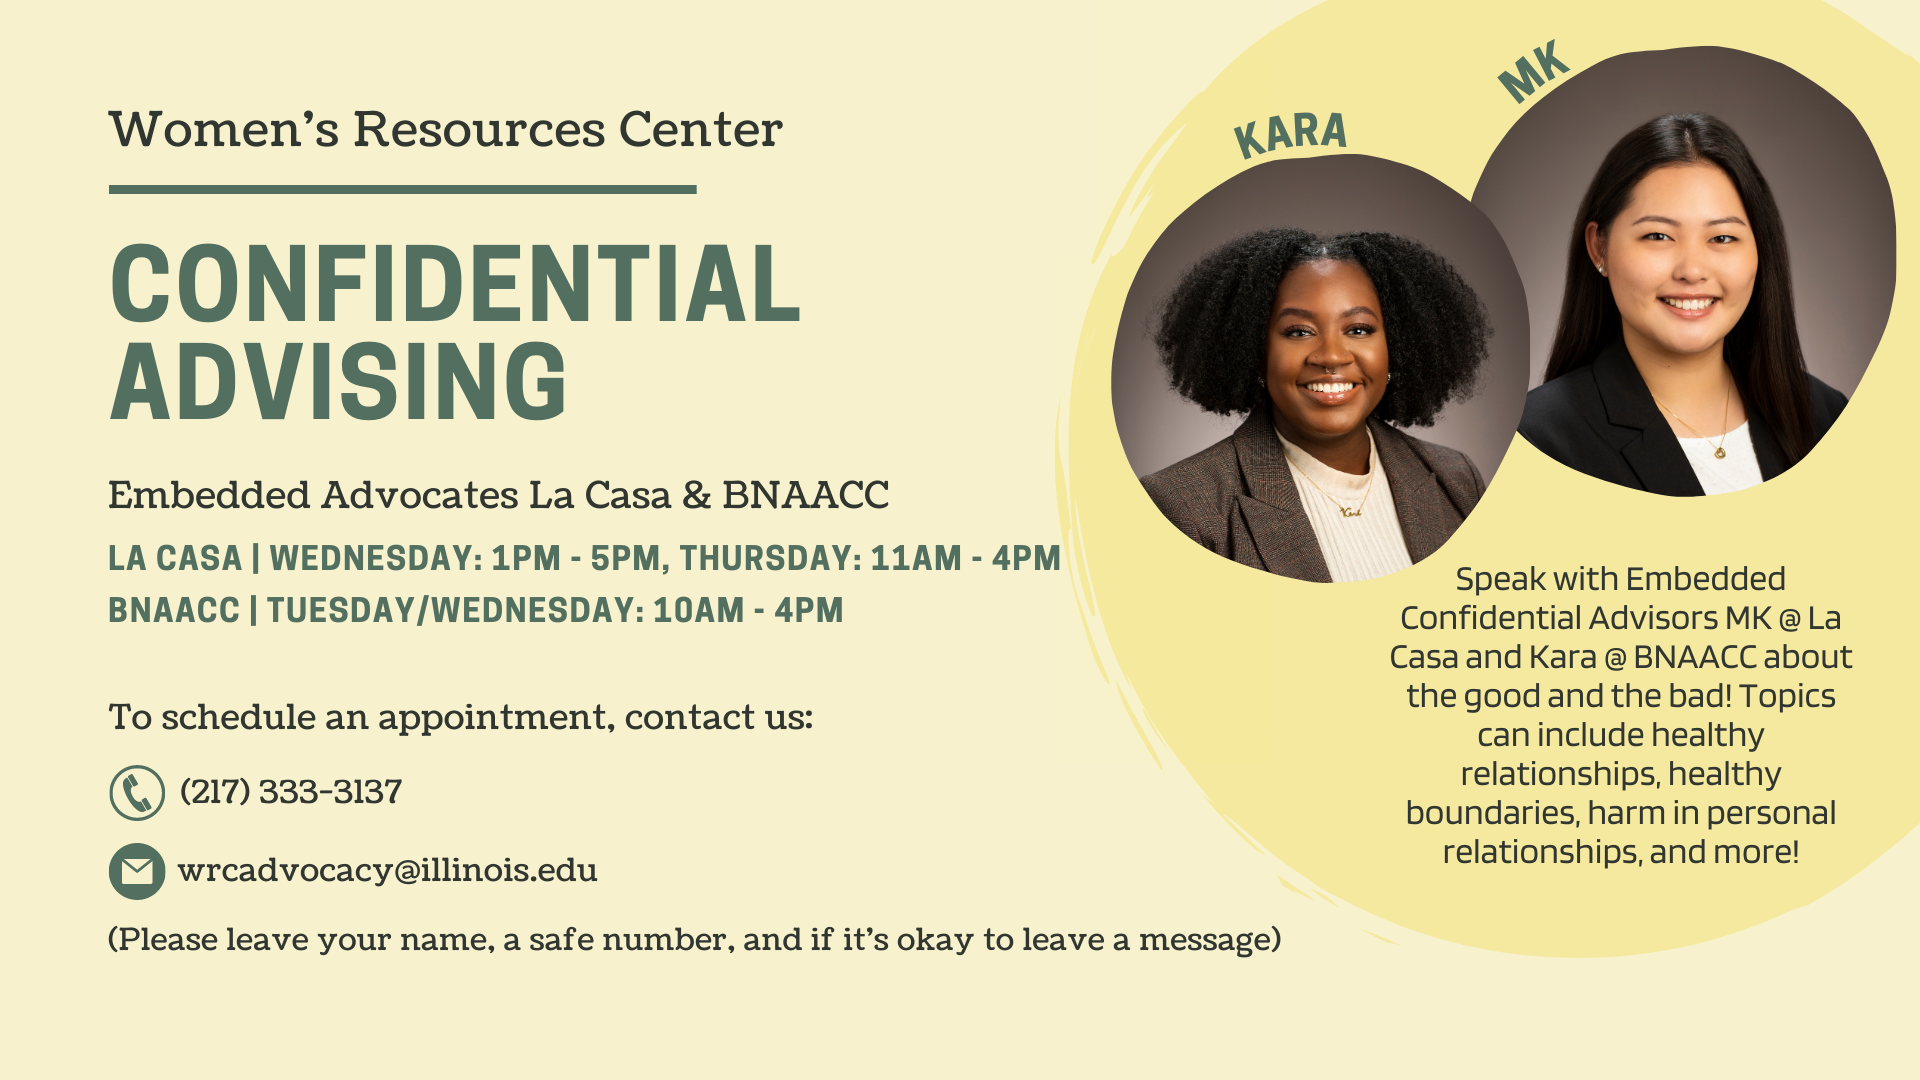 Confidential advising Embedded Advocates La Casa & BNAACCSpeak with Embedded Confidential Advisors (MK @ La Casa and Kara @ BNAACC) about the good and the bad! Topics can include healthy relationships, healthy boundaries, harm in personal relationships, and more! To schedule an appointment, contact us: (217) 333-3137 wrcadvocacy@illinois.edu (Please leave your name, a safe number, and if it's okay to leave a message) 